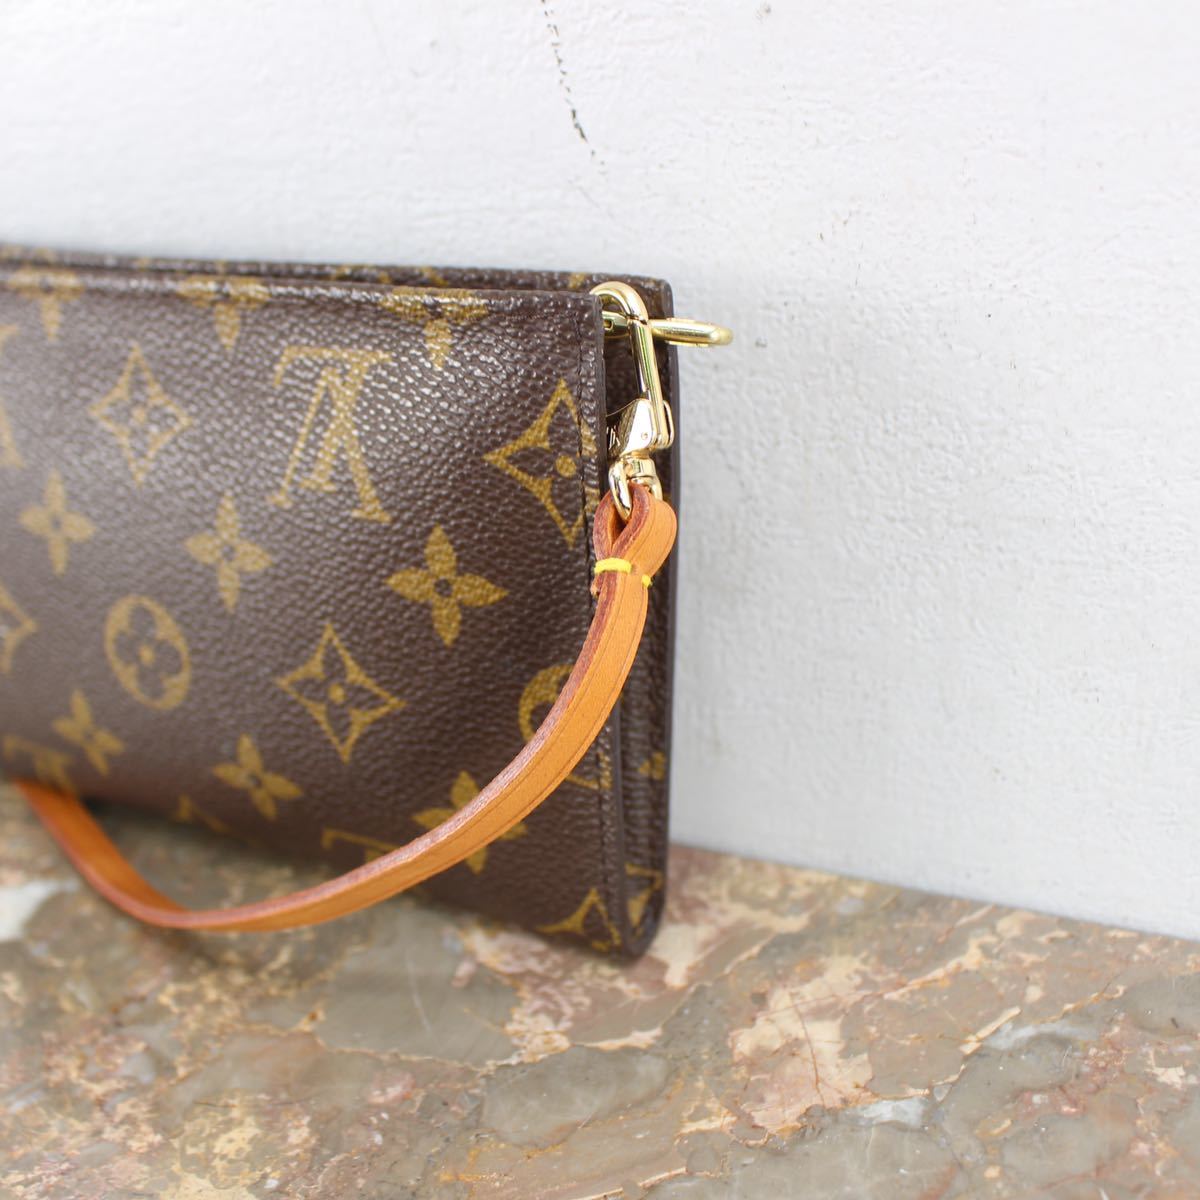 PayPayフリマ｜LOUIS VUITTON FL0031 MINI POCHETTE MADE IN FRANCE/ ルイヴィトンアクセソワールタイプミニポシェット(ハンドバッグ)